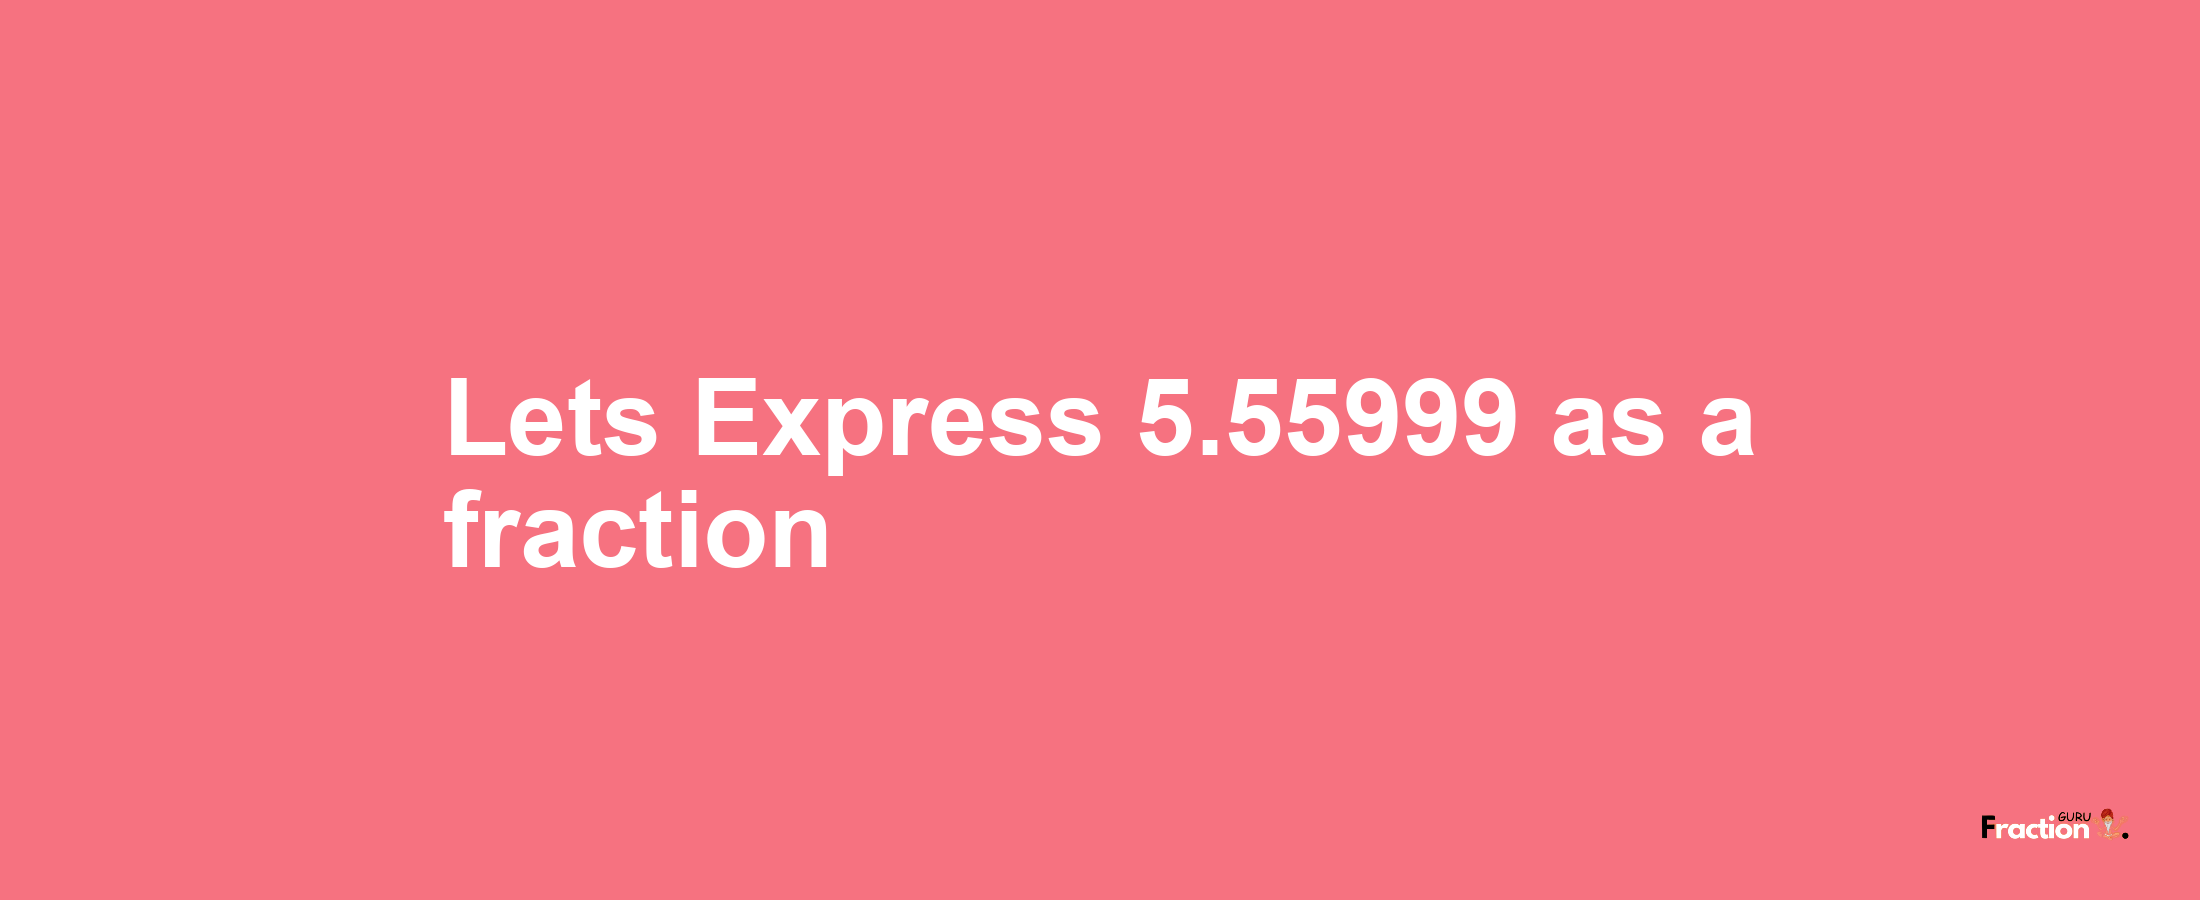 Lets Express 5.55999 as afraction